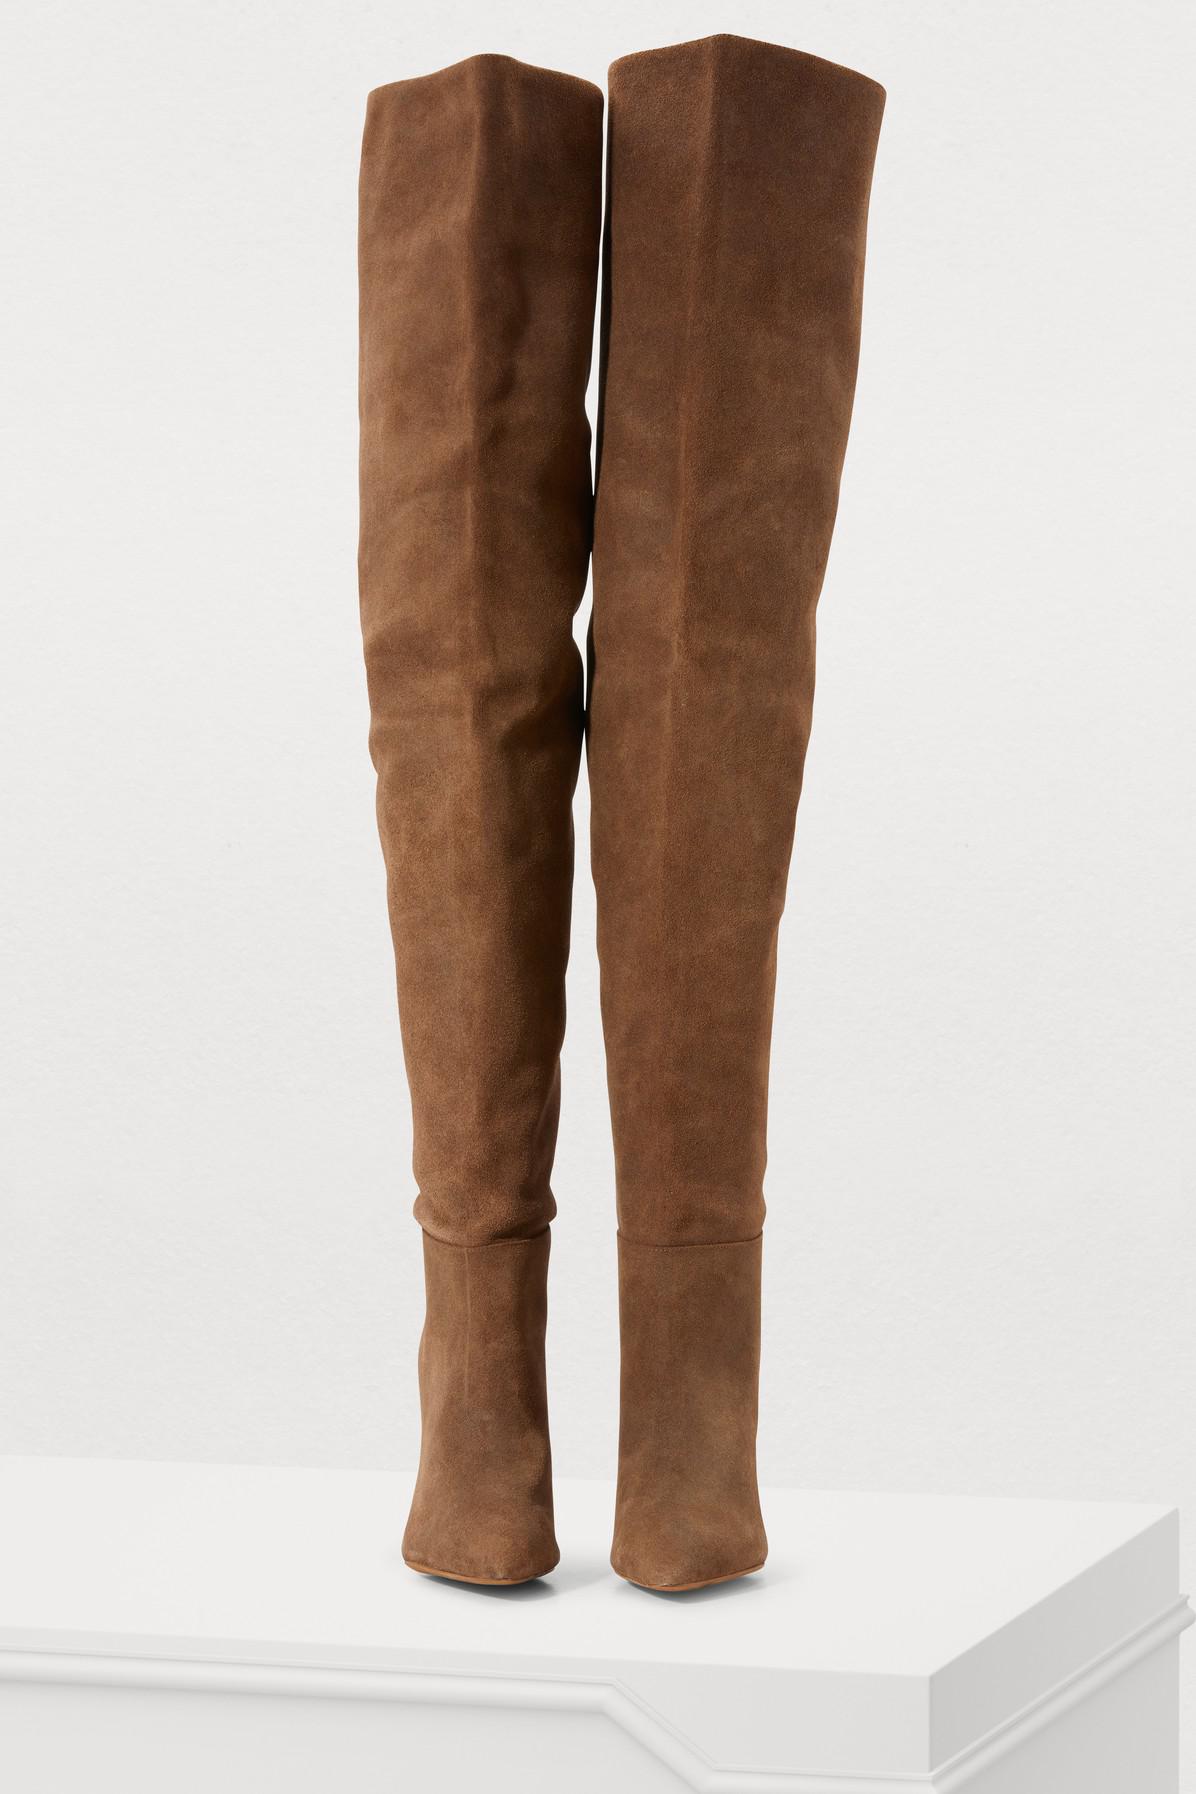 Yeezy Tubular Thigh-high Boots in Oak (Brown) | Lyst